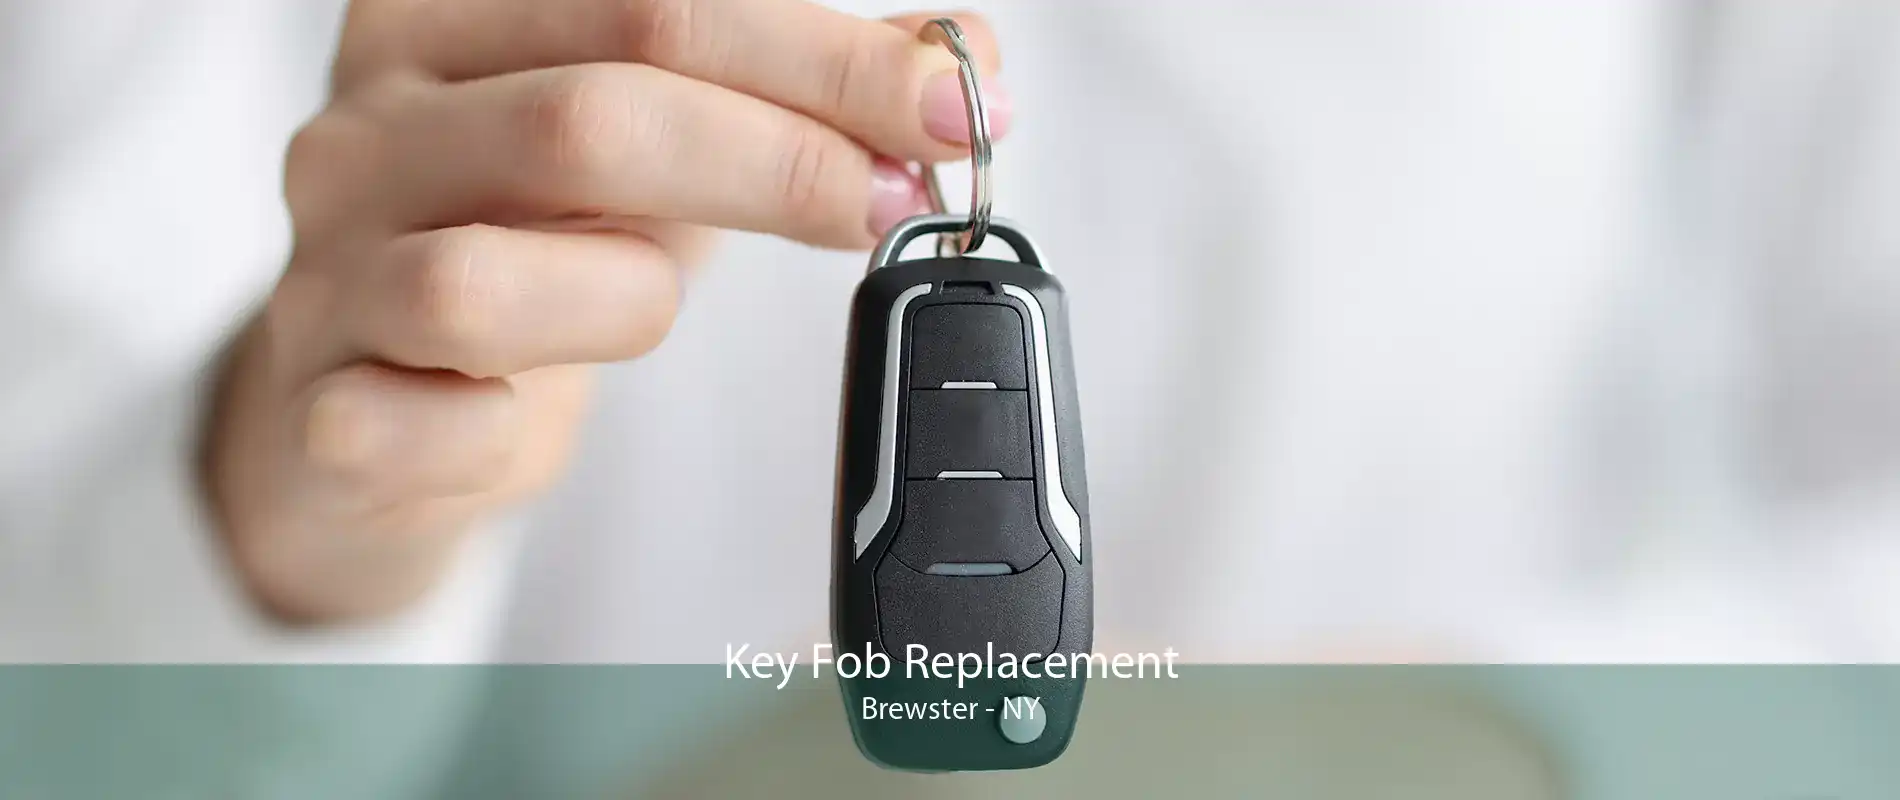 Key Fob Replacement Brewster - NY